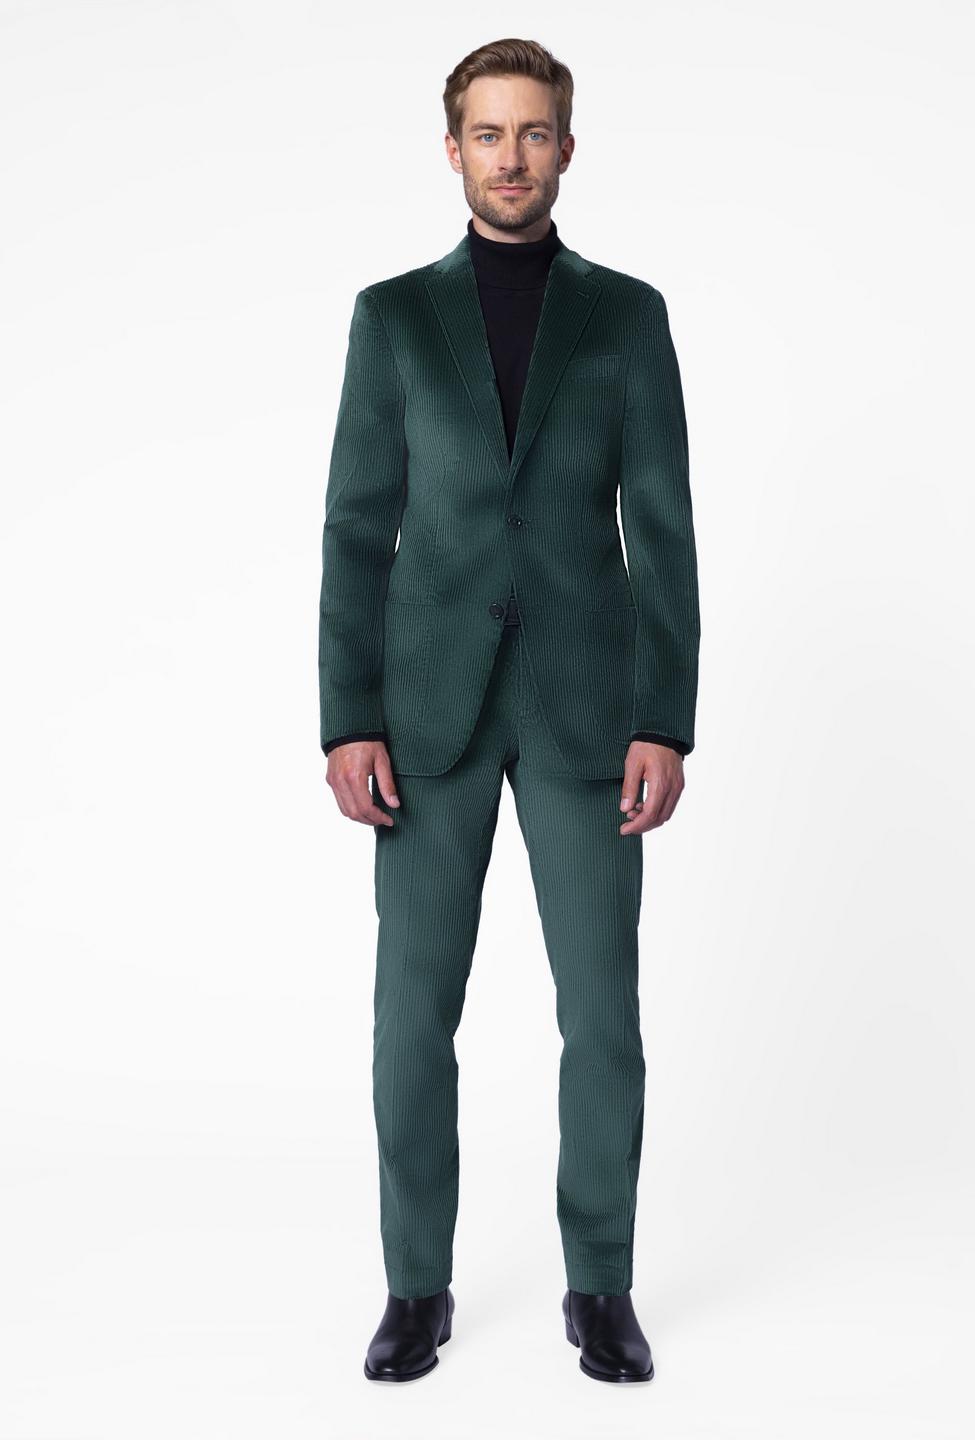 Green suit - Solid Design from Indochino Collection